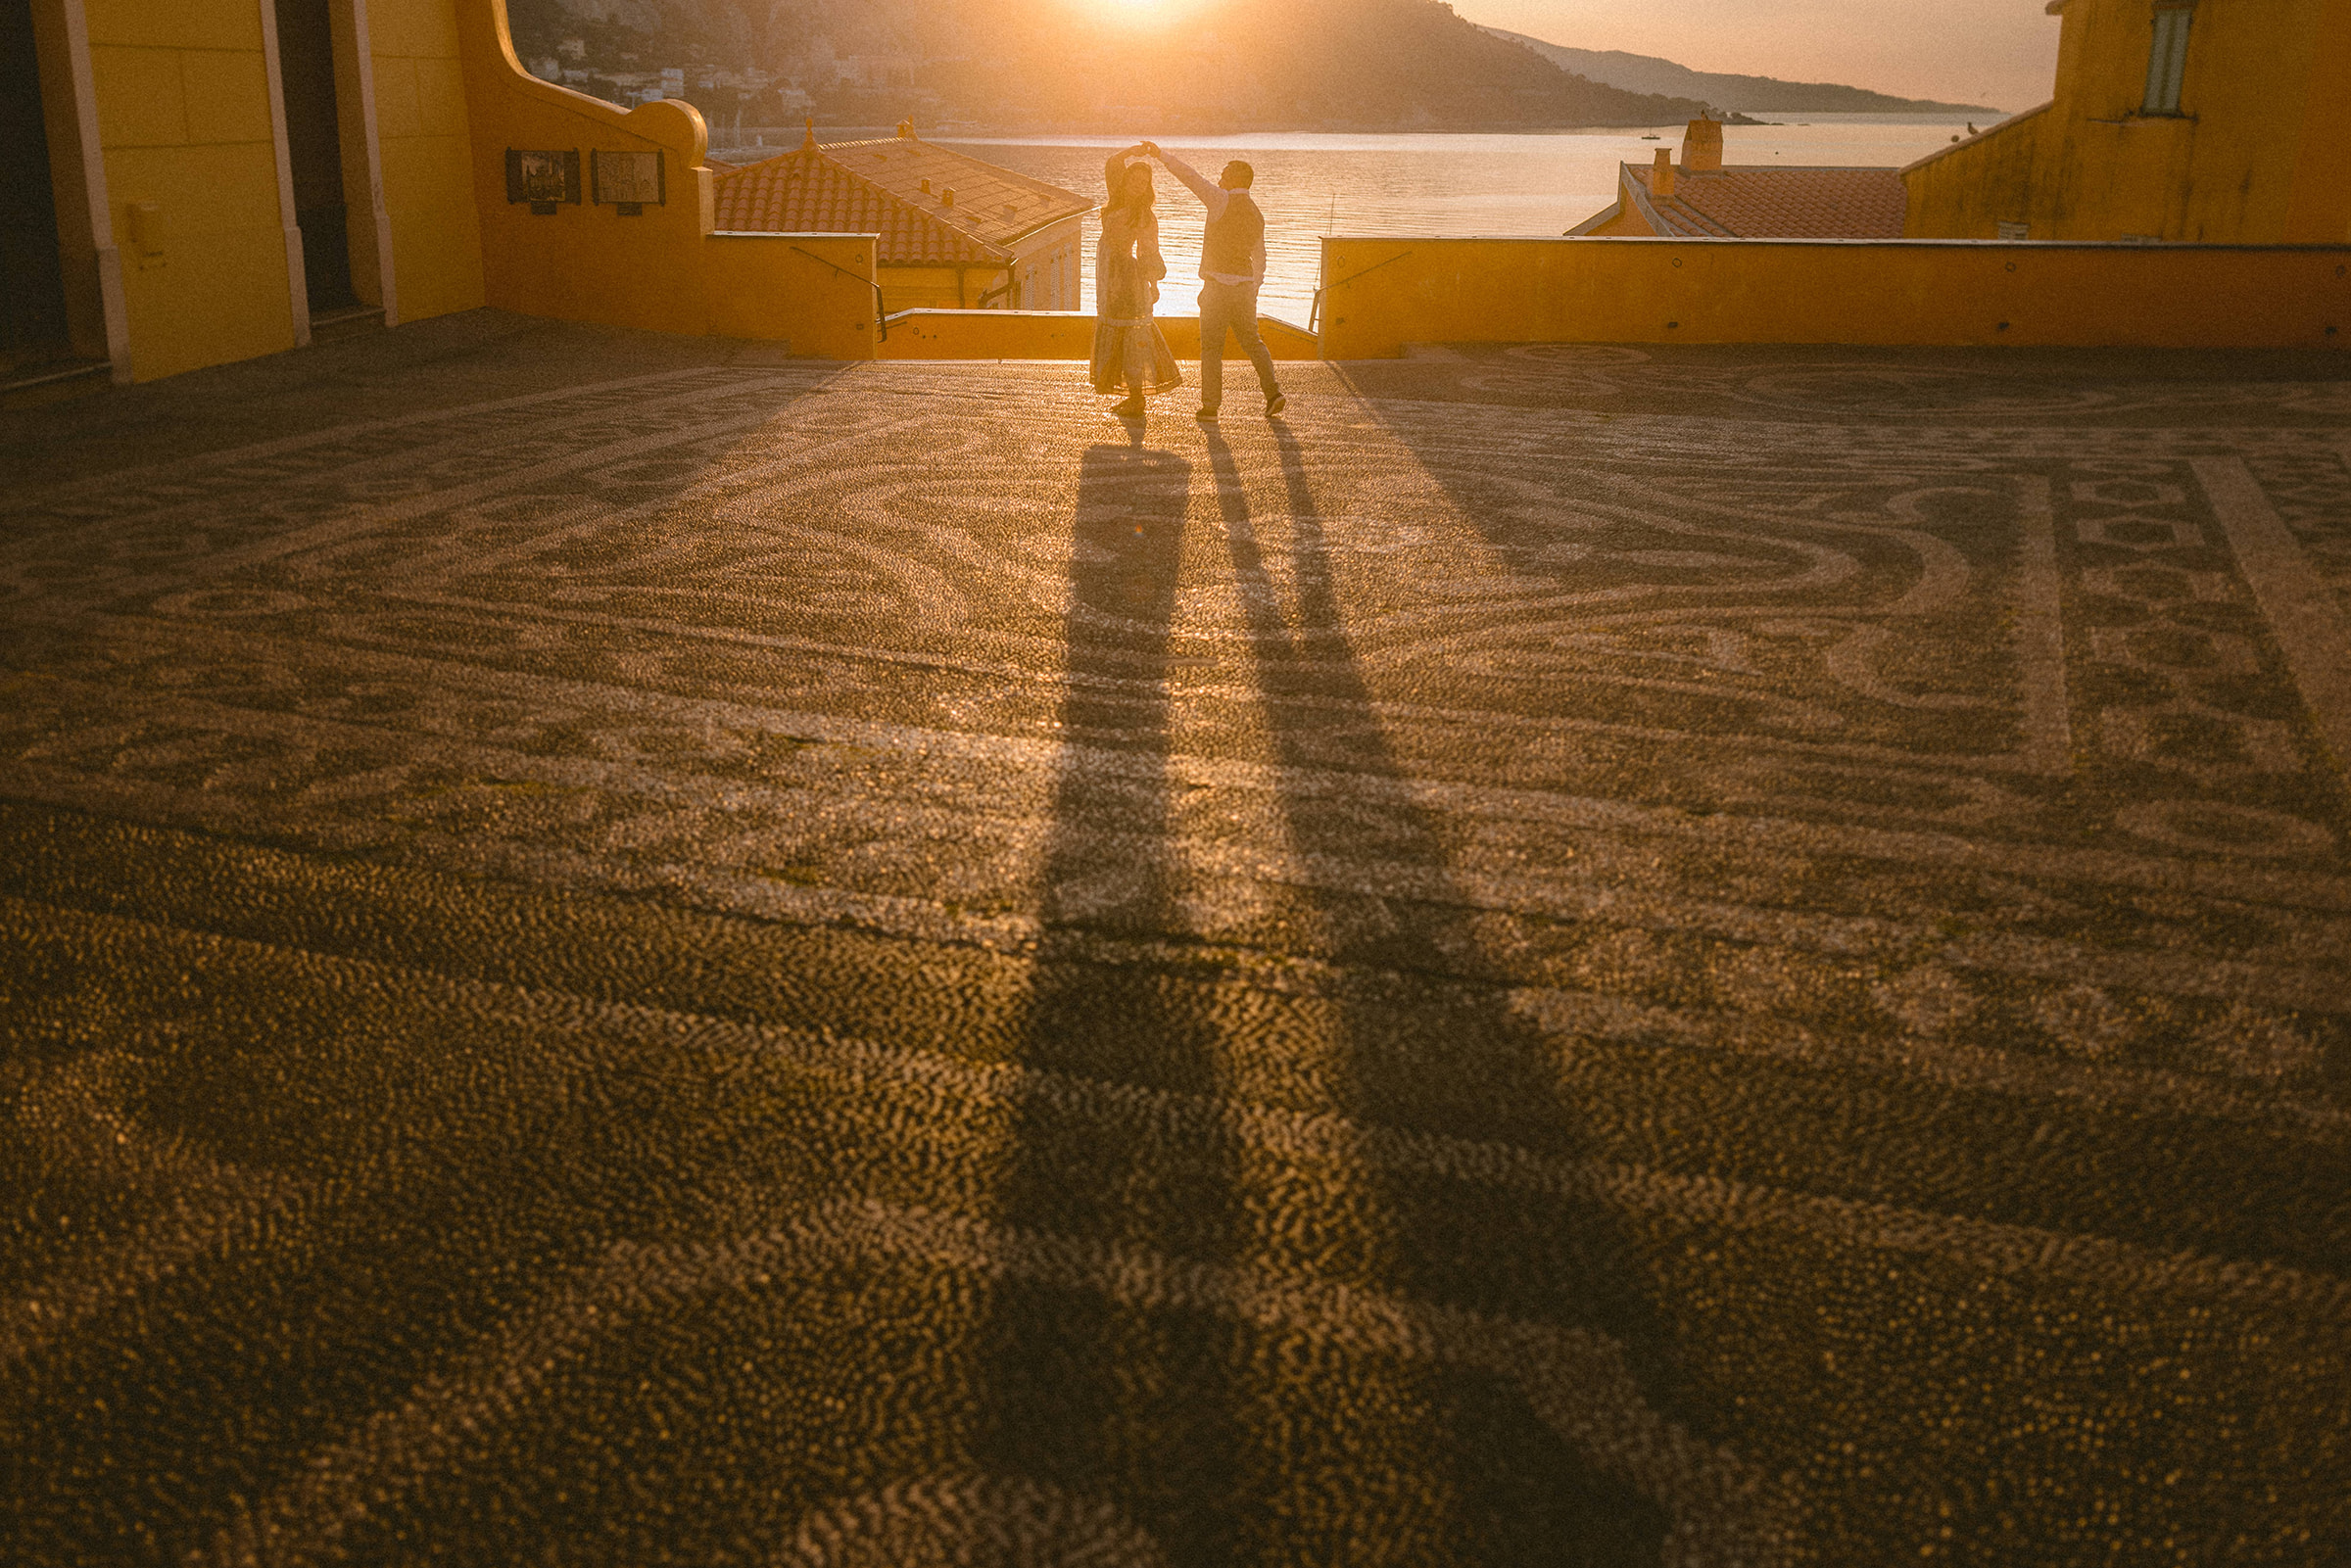 A couple dance during sunrise in Menton, french riviera